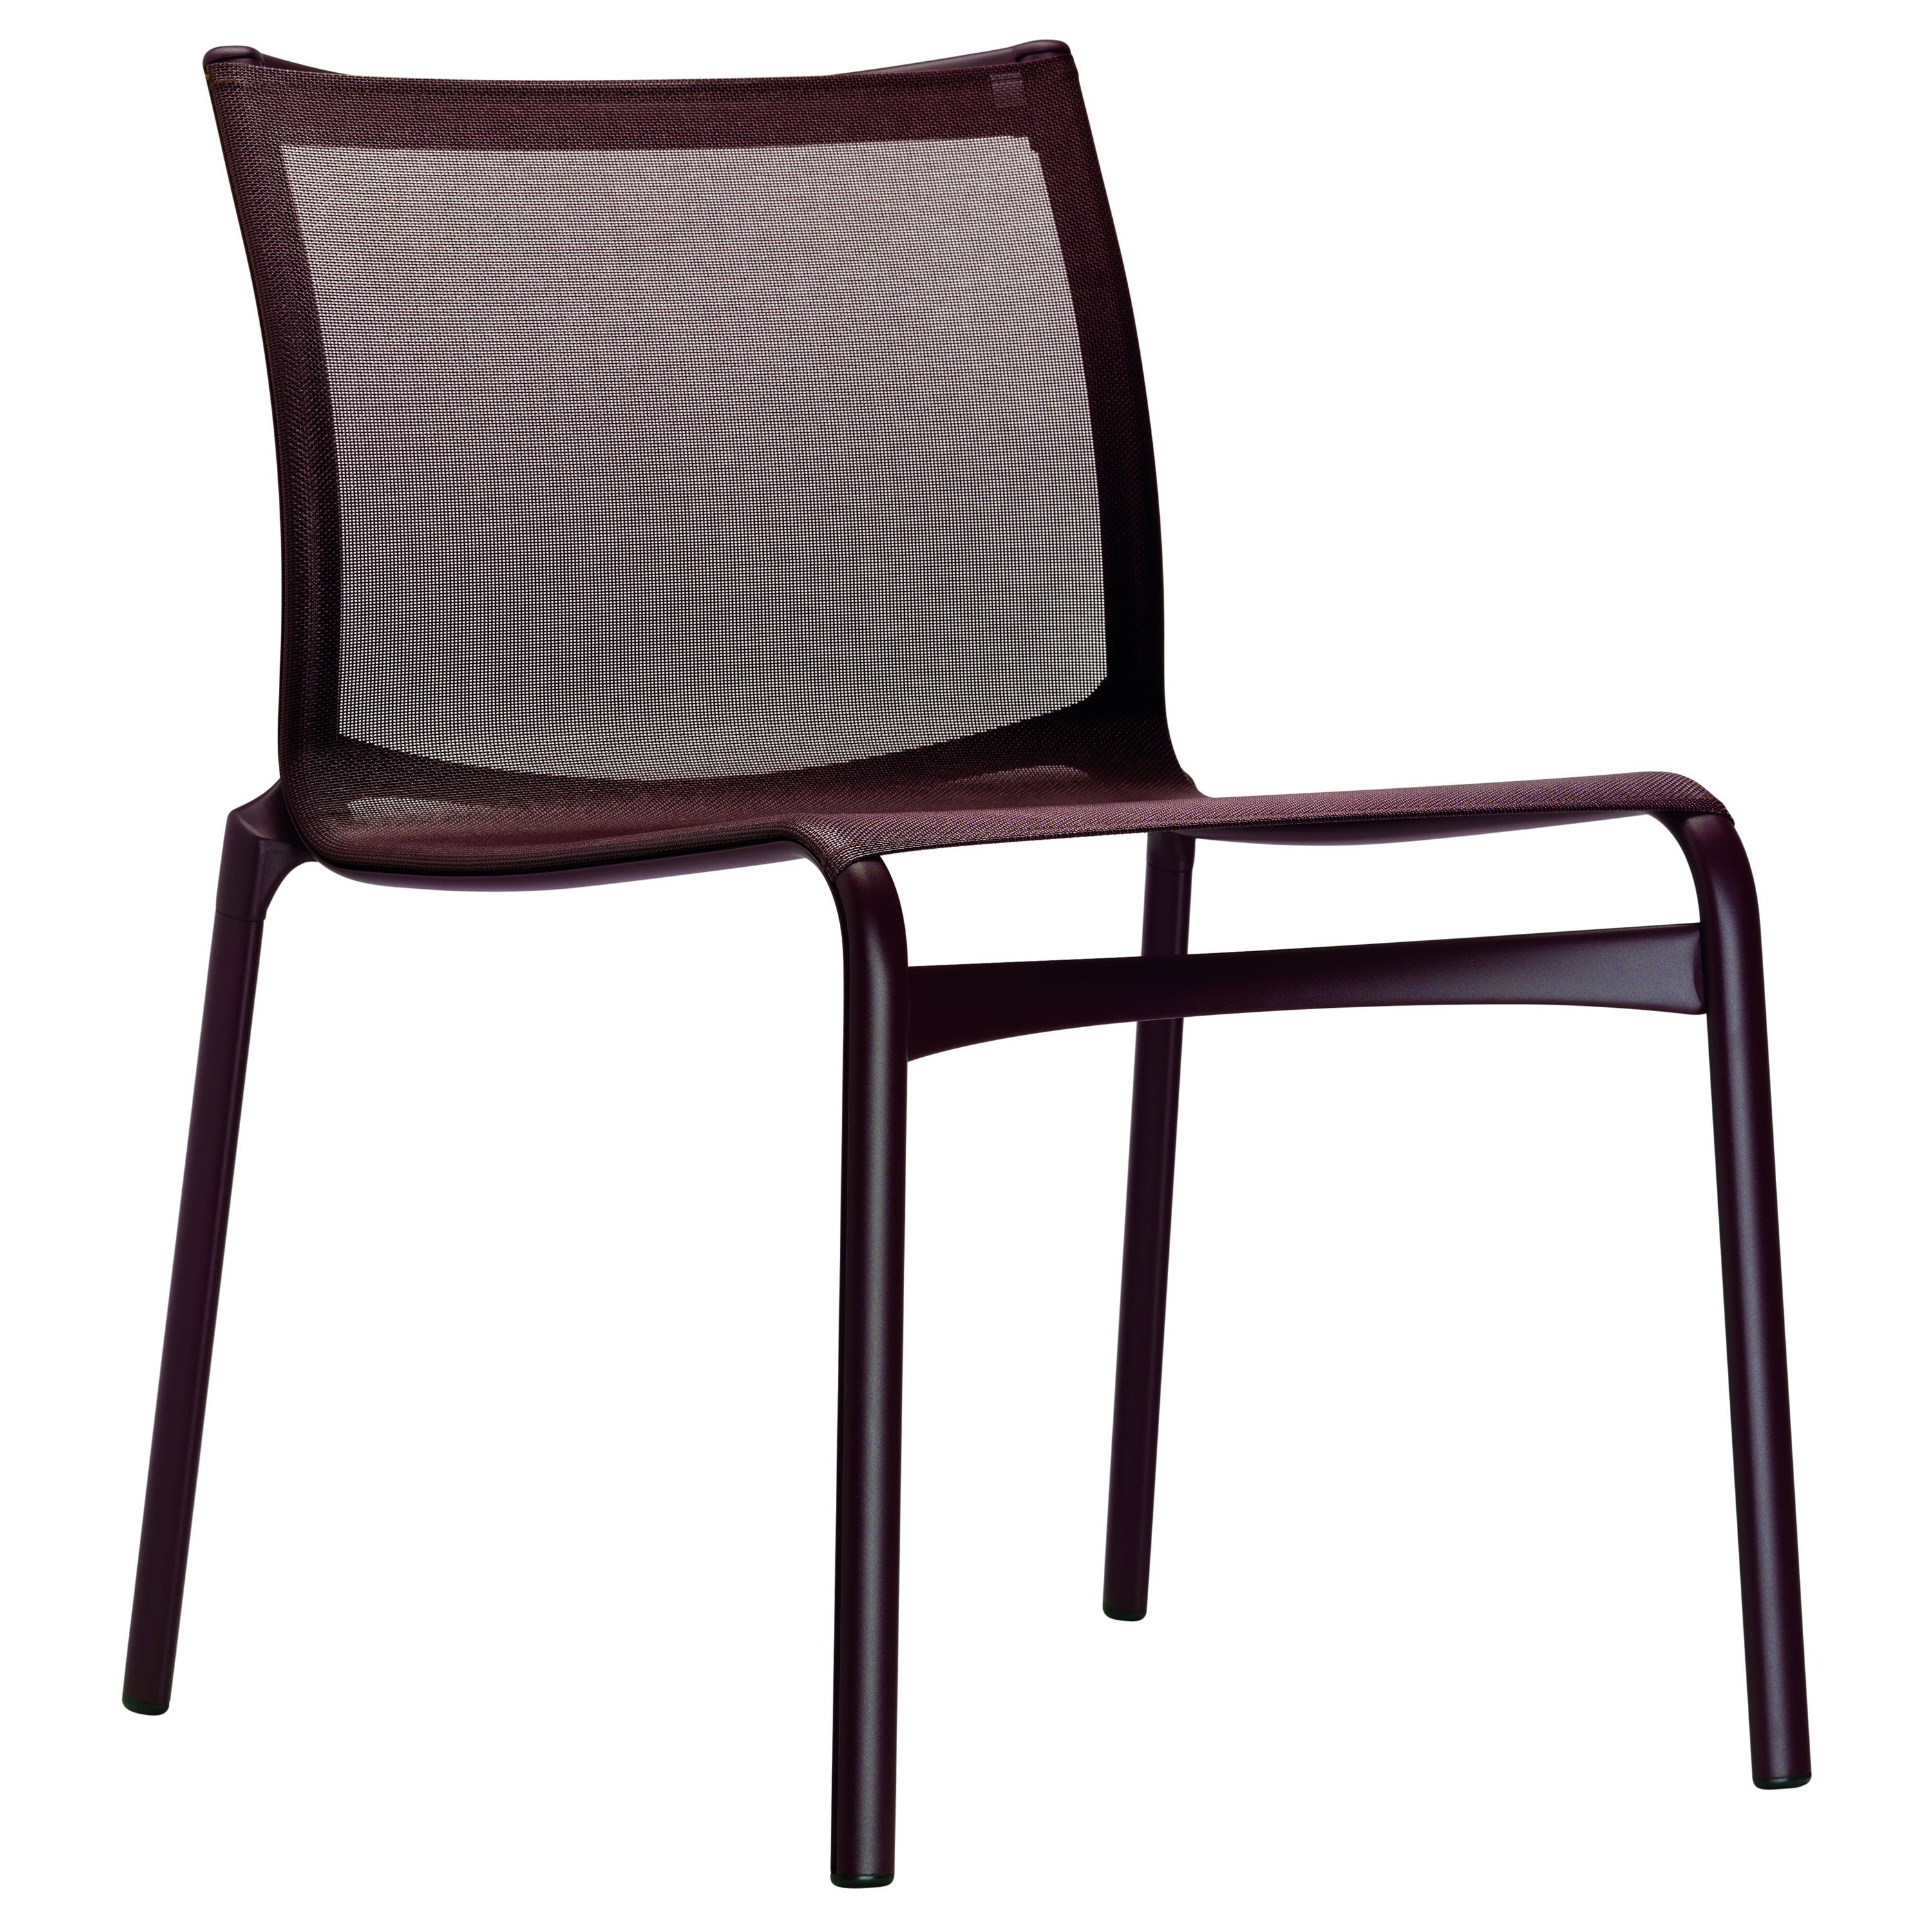 Alias Frame 52 Chair in Aubergine Mesh Seat with Lacquered Aluminium Frame For Sale